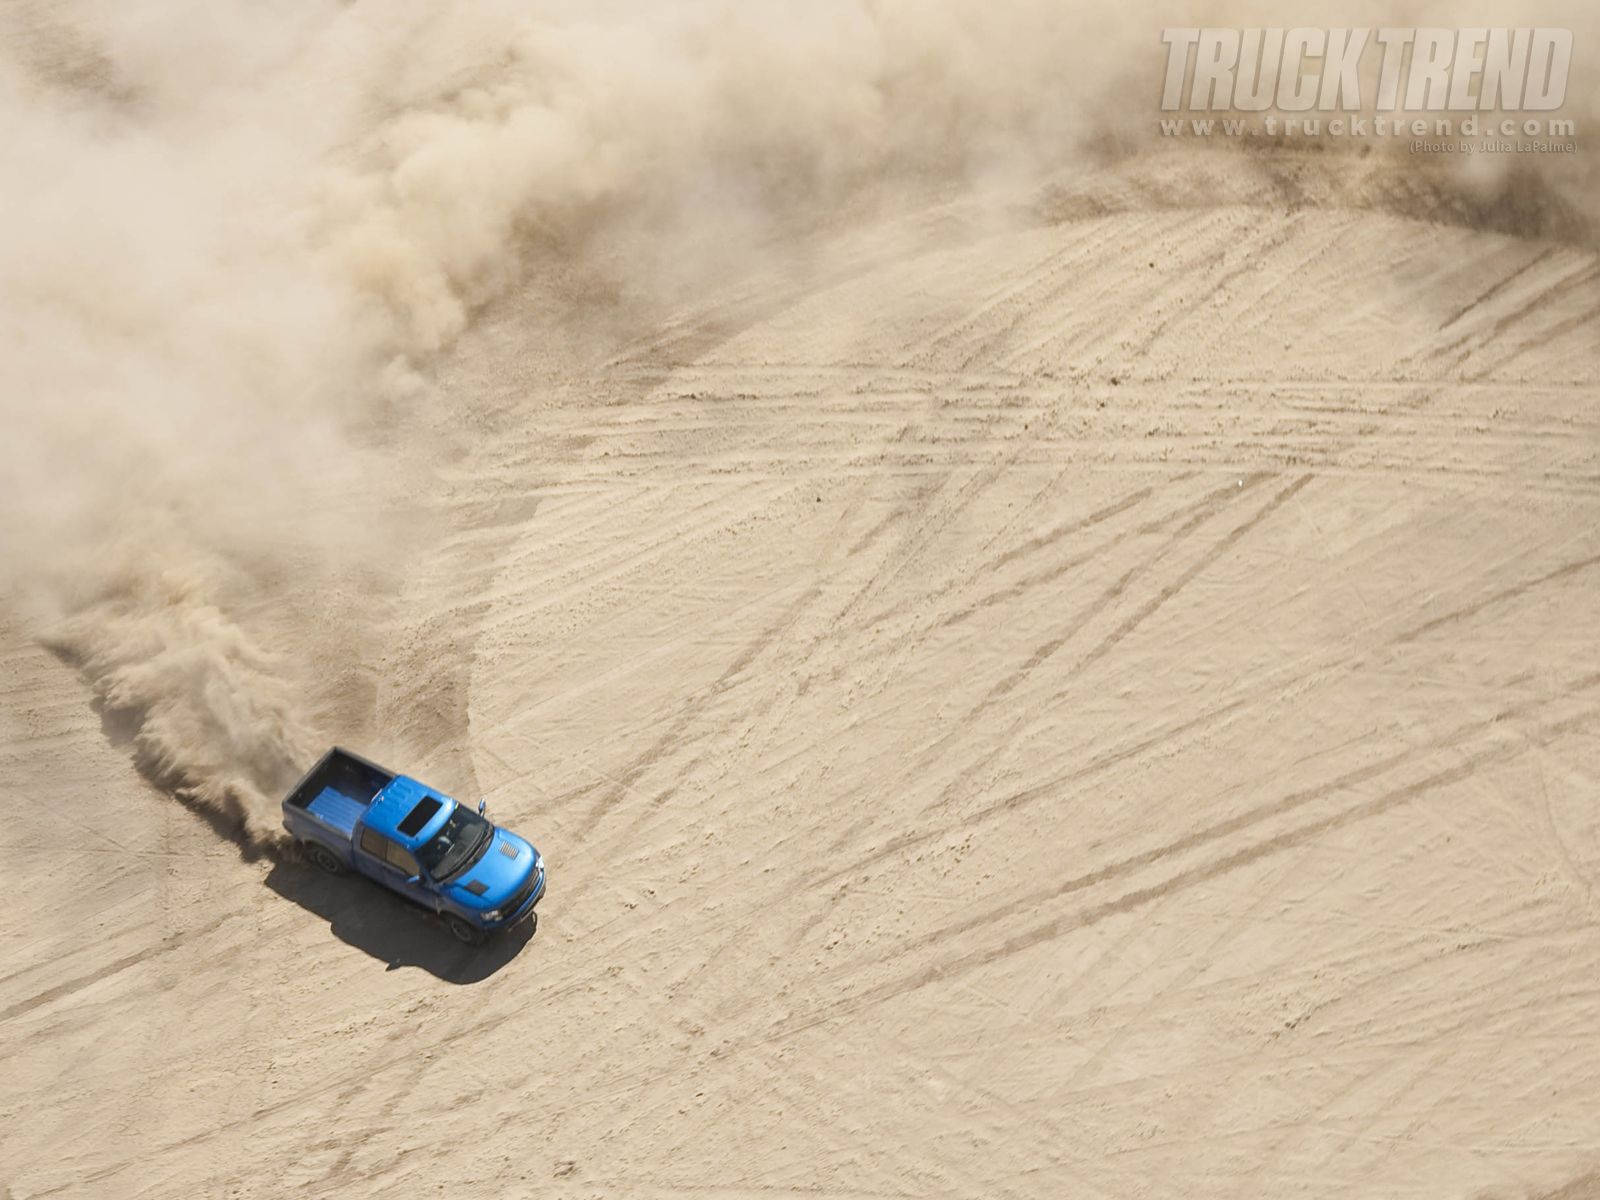 Power and Performance: The Ford Raptor in Drift Wallpaper